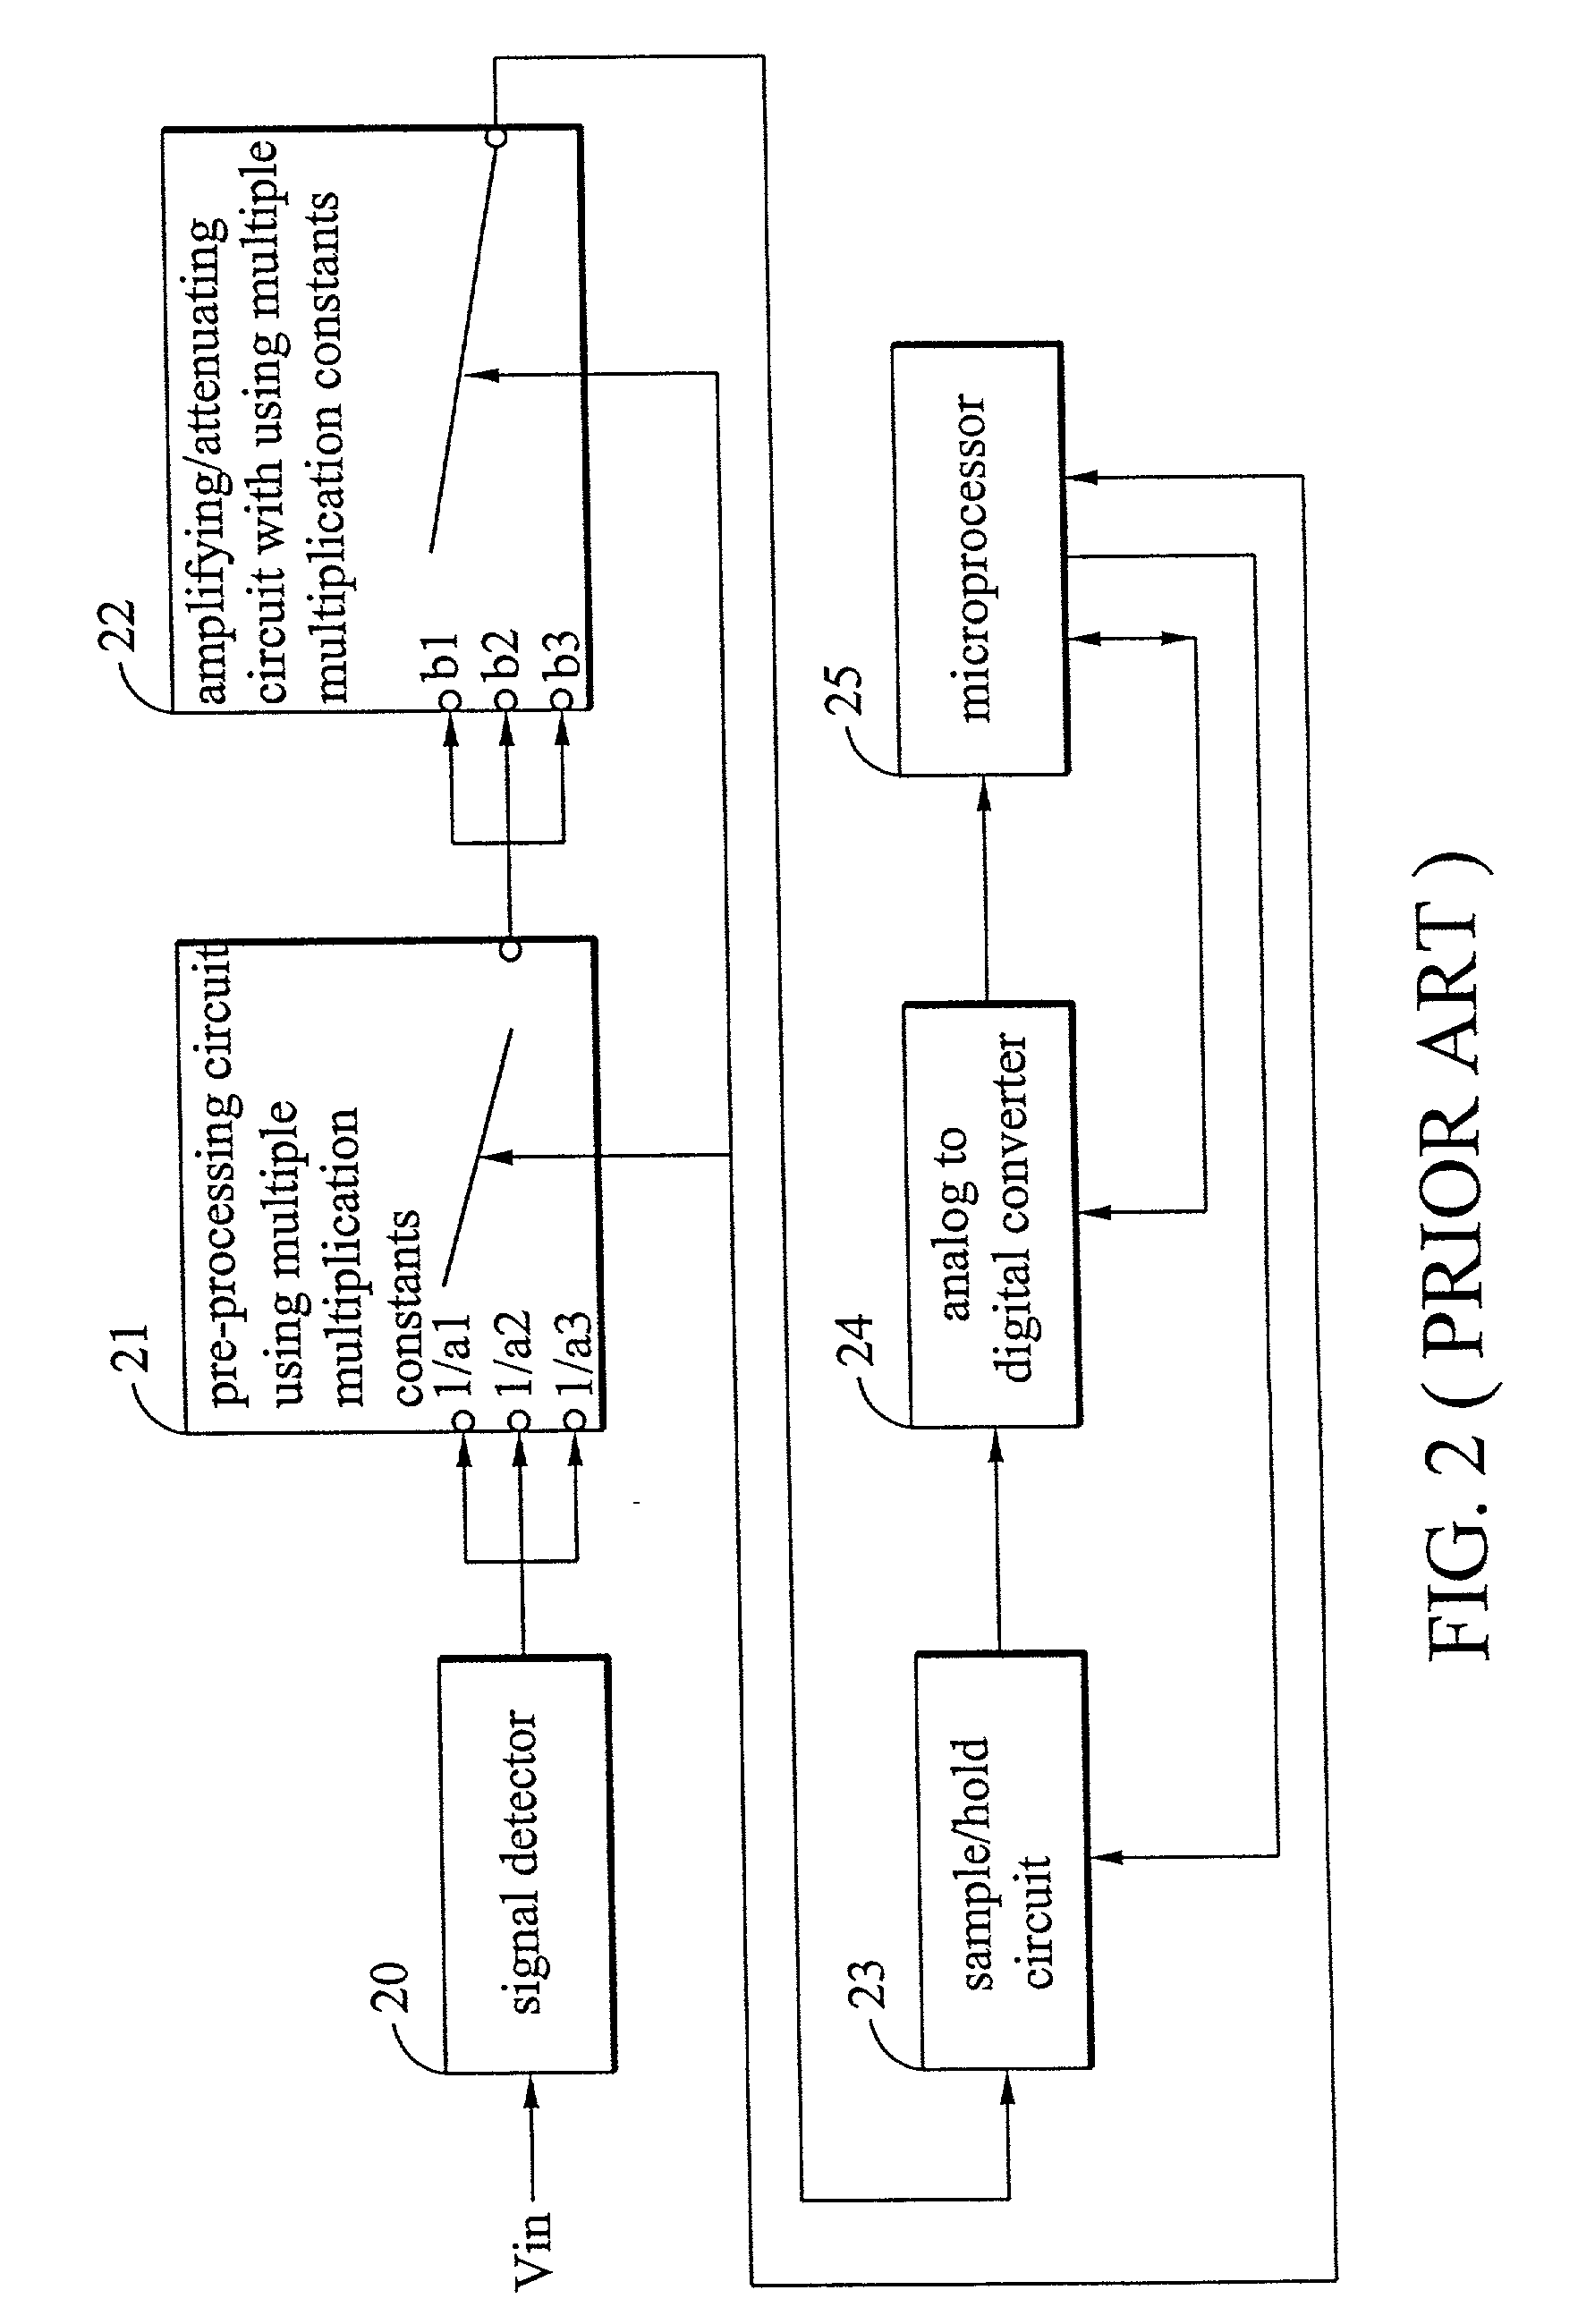 Automatic gain control circuit for analog signals